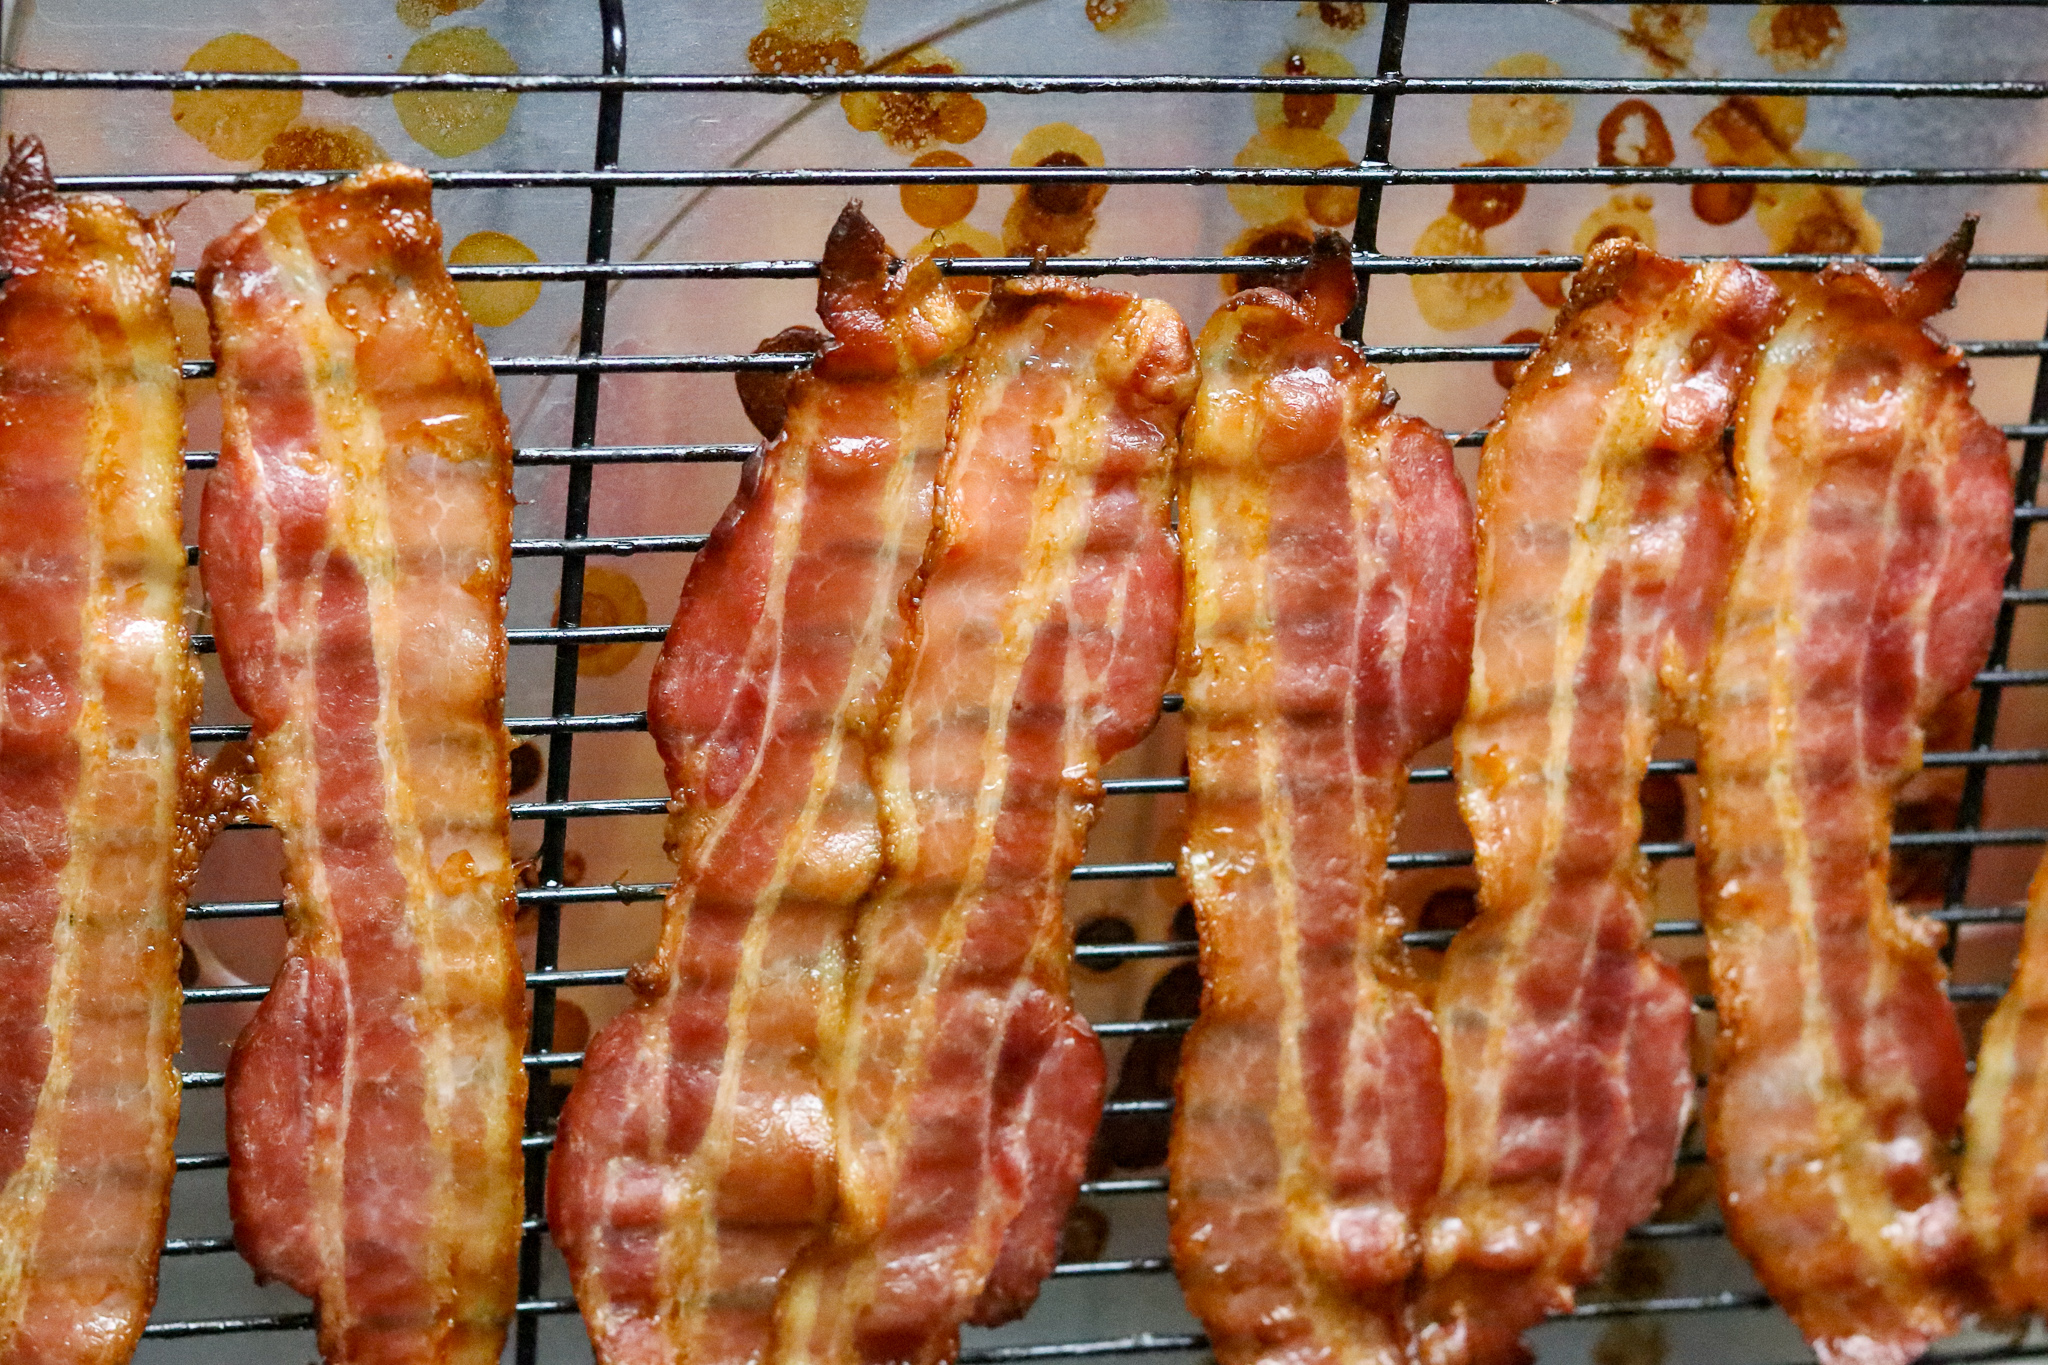 Cooked bacon on a baking rack.